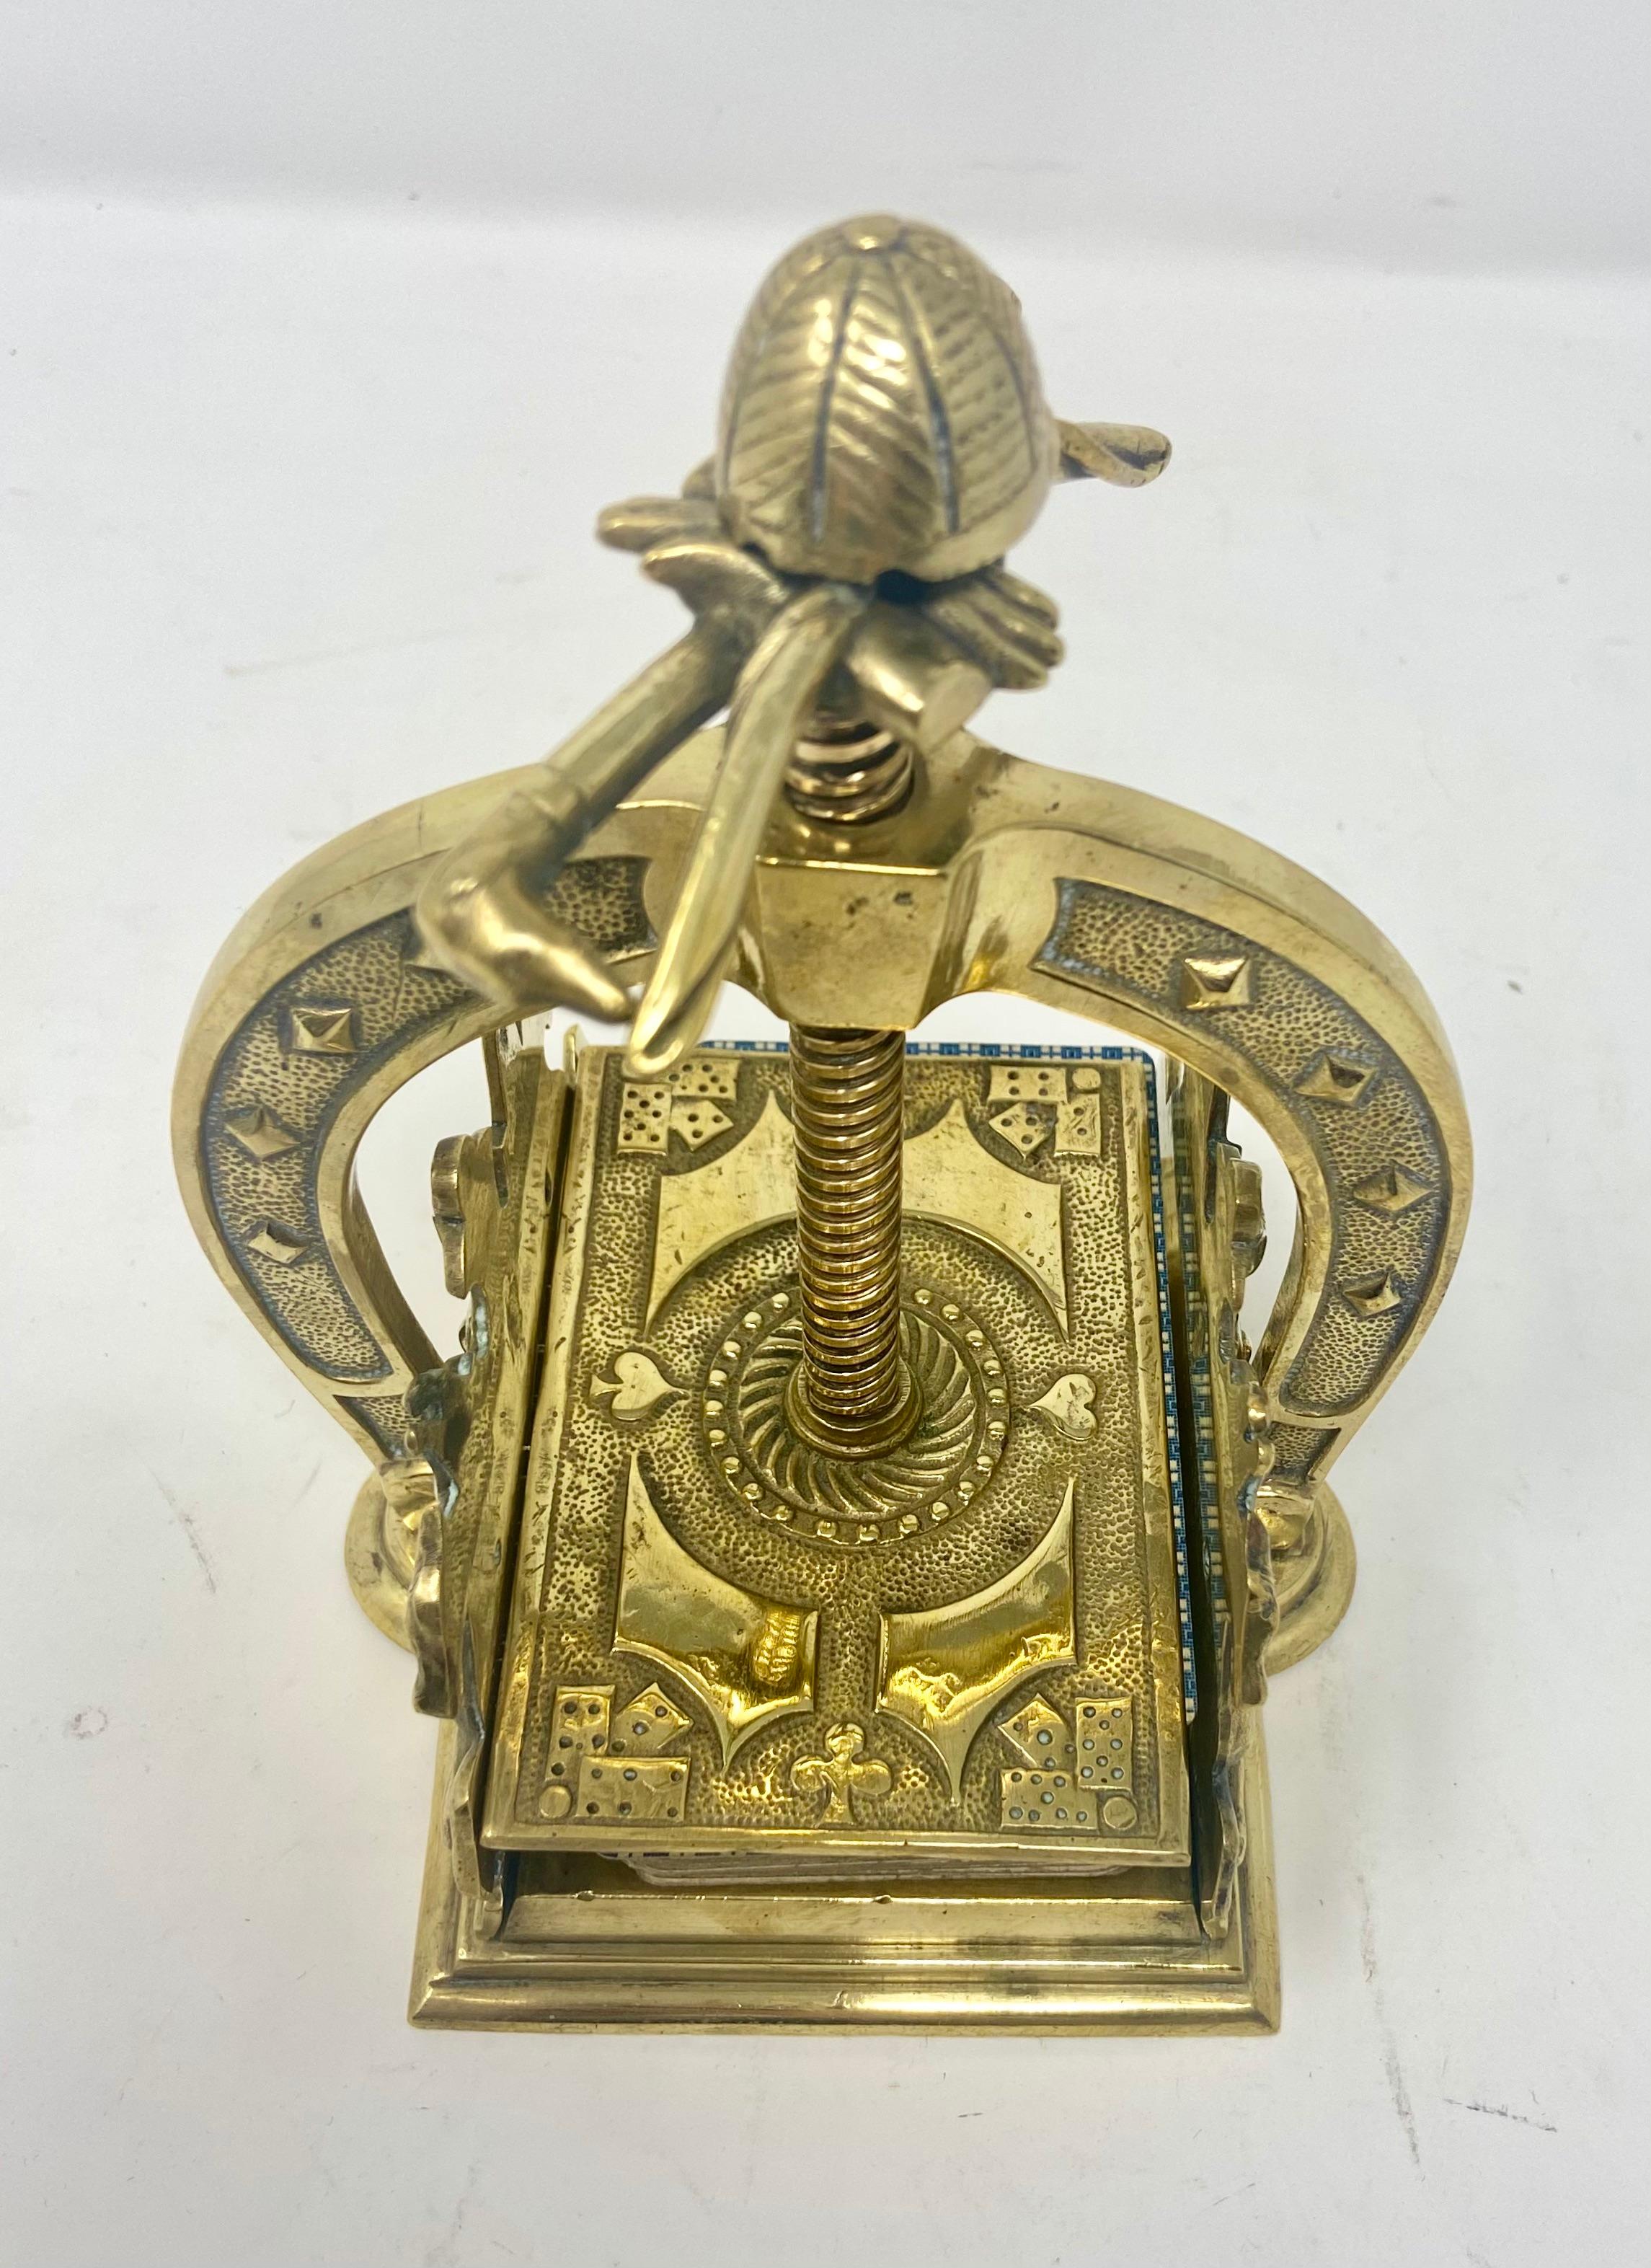 Antique Victorian brass playing card press in a horse racing theme, Circa 1900.